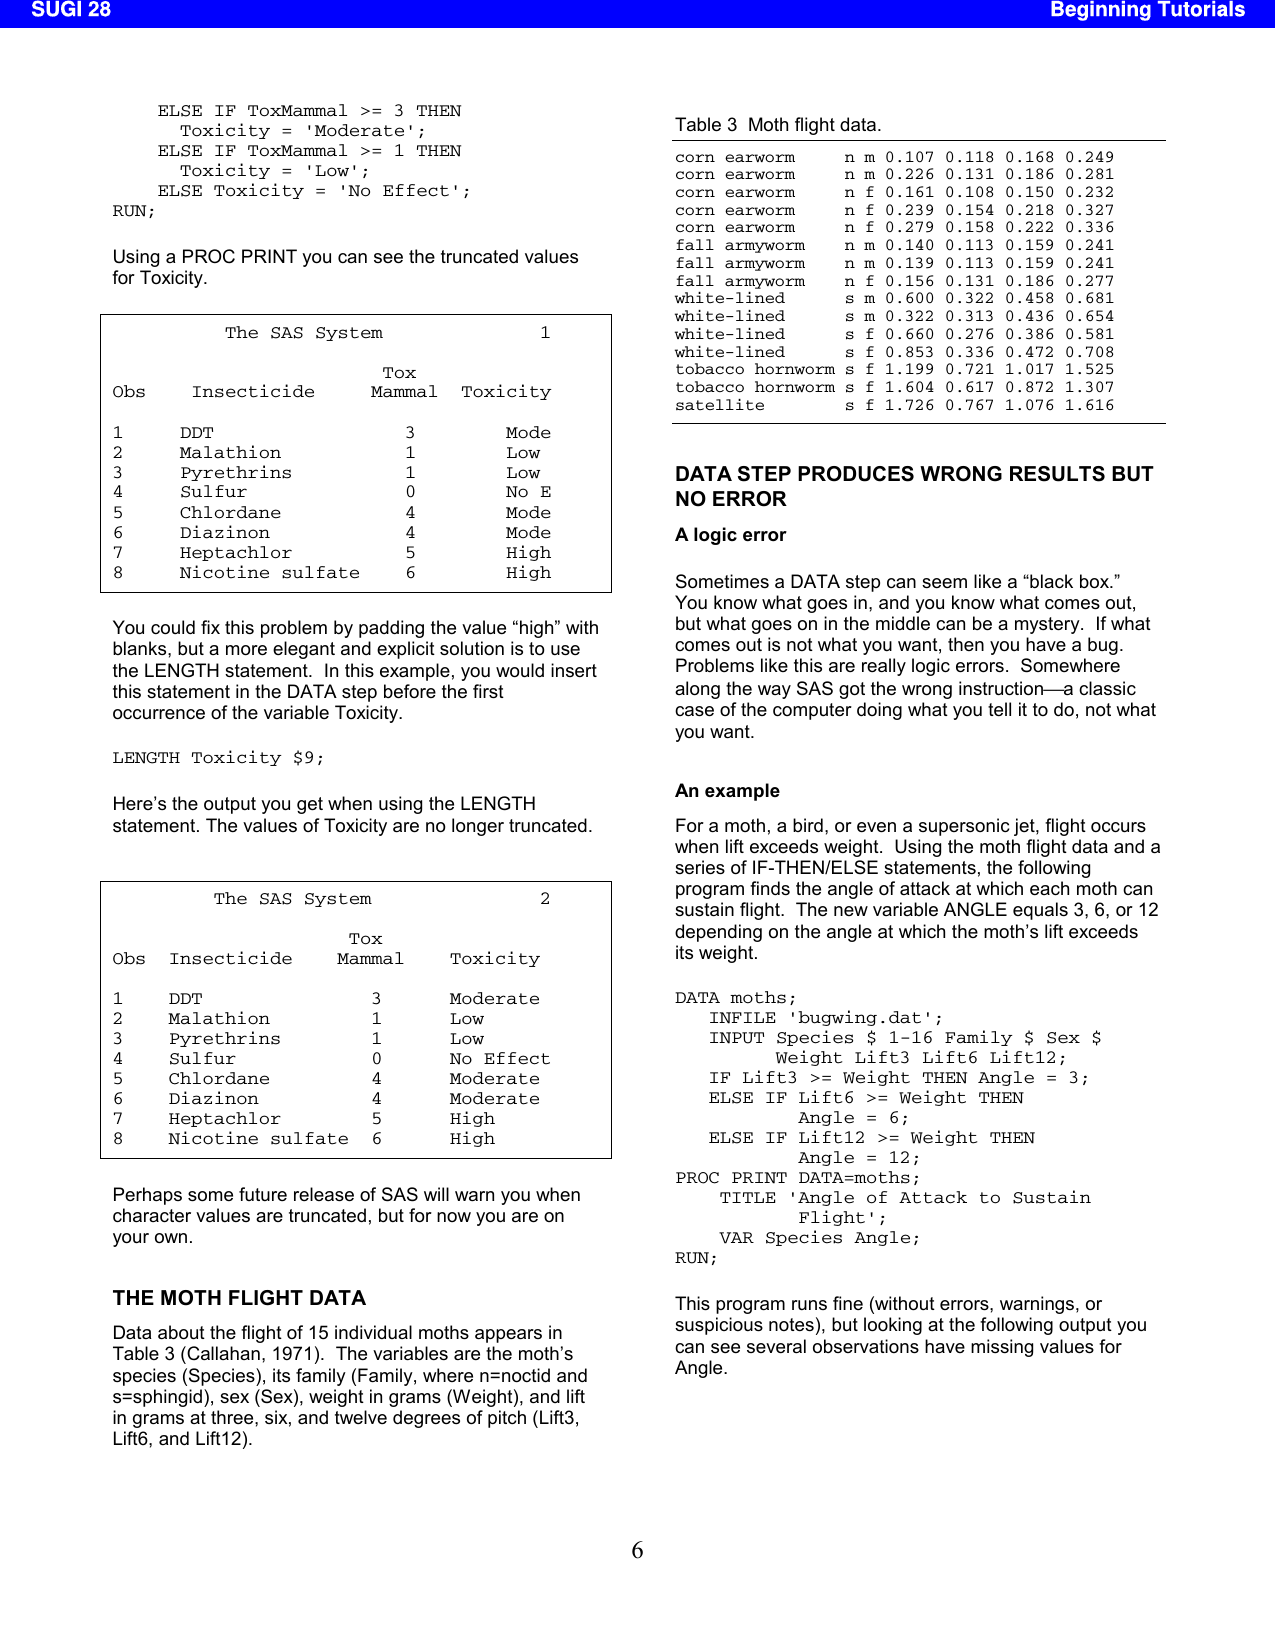 Page 6 of 10 - SUGI 28: Errors, Warnings, And Notes (Oh My): A Practical Guide To Debugging SAS(r) Programs